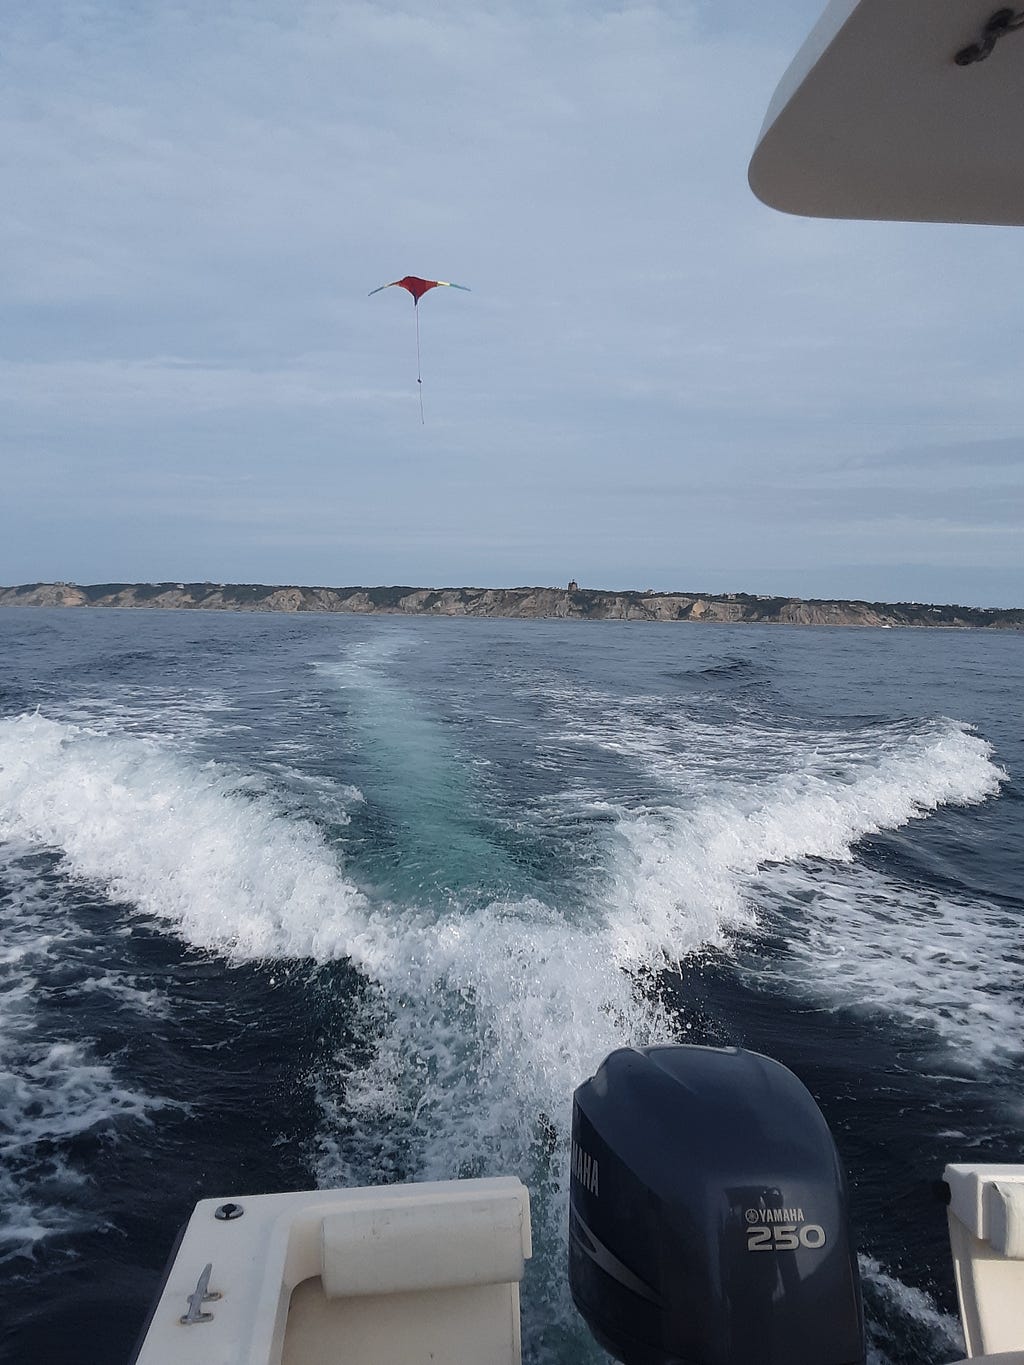 A kite rising up in the air behind a motorboat